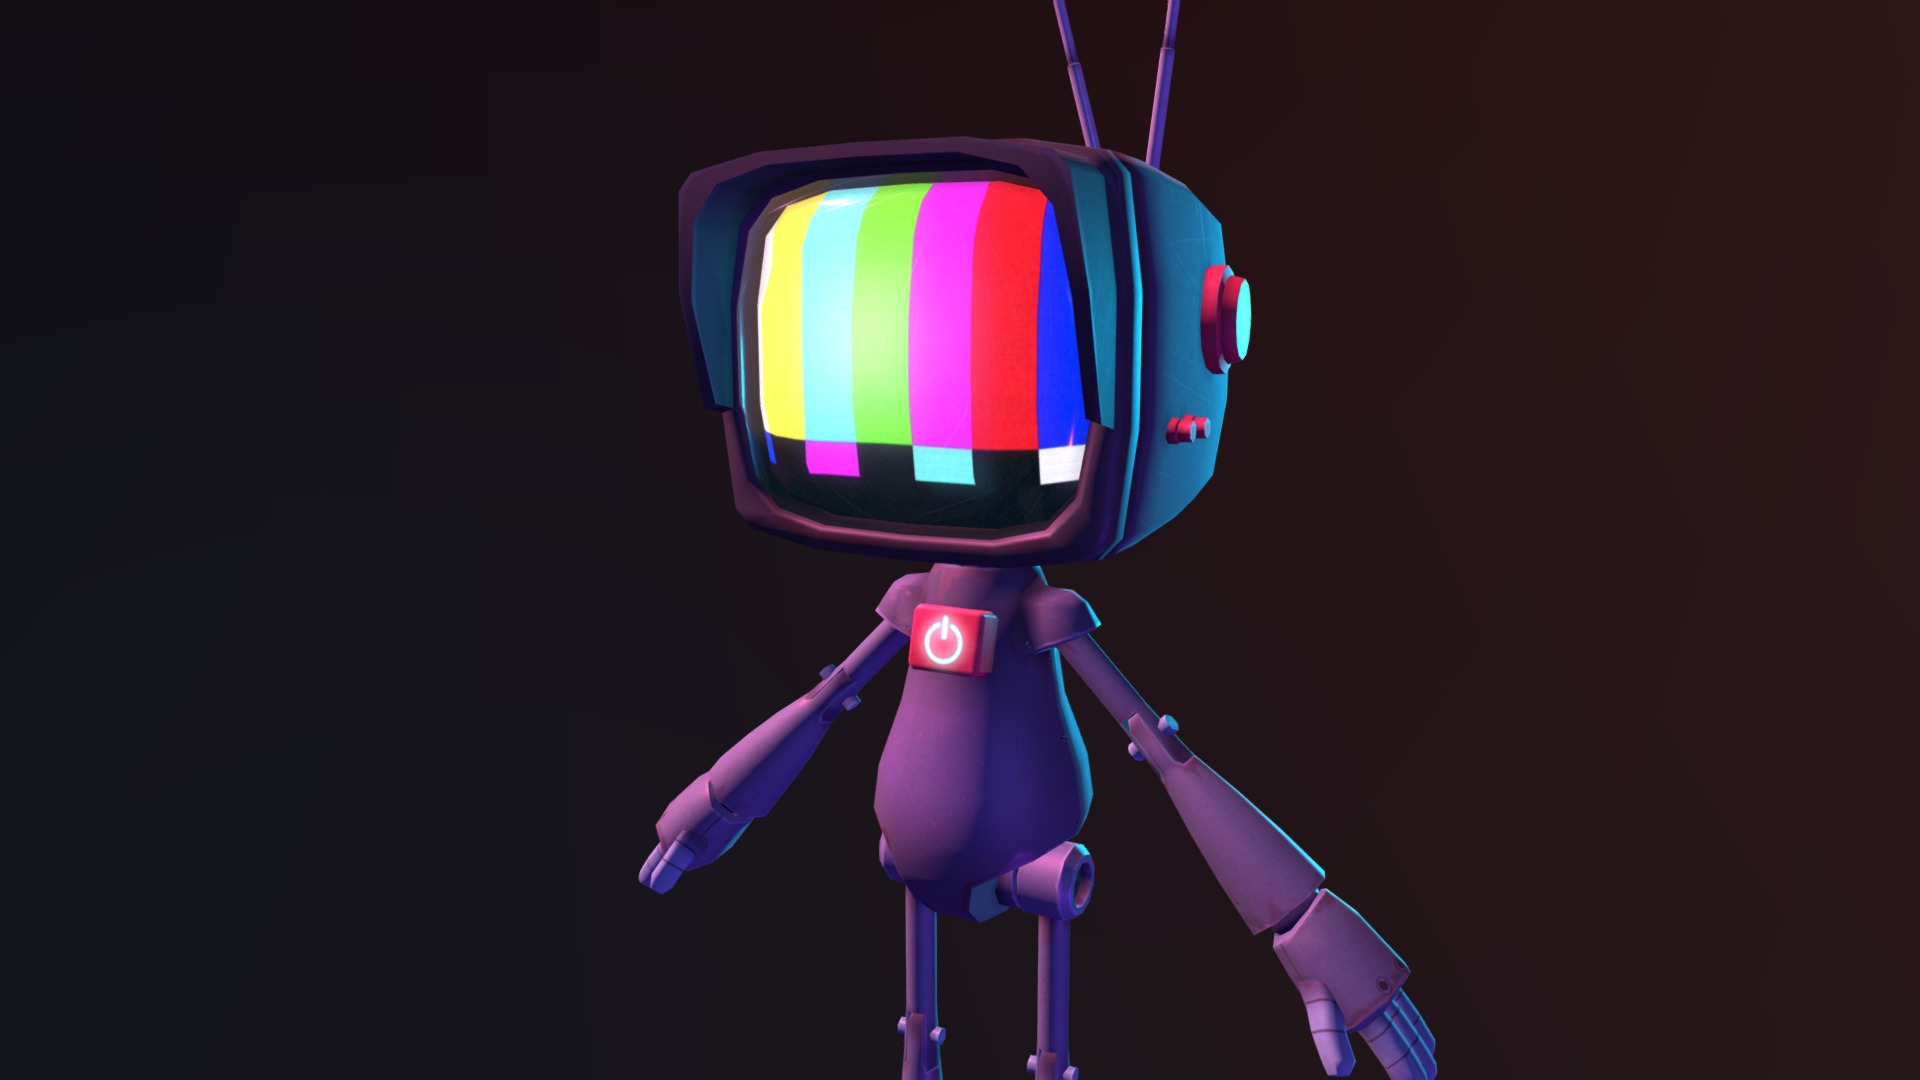 This is for a University project,
The total polycount is 2225,
All the textures were hand painted in photoshop - TV boy MK2 - 3D model by JordanNoadMault 3d model